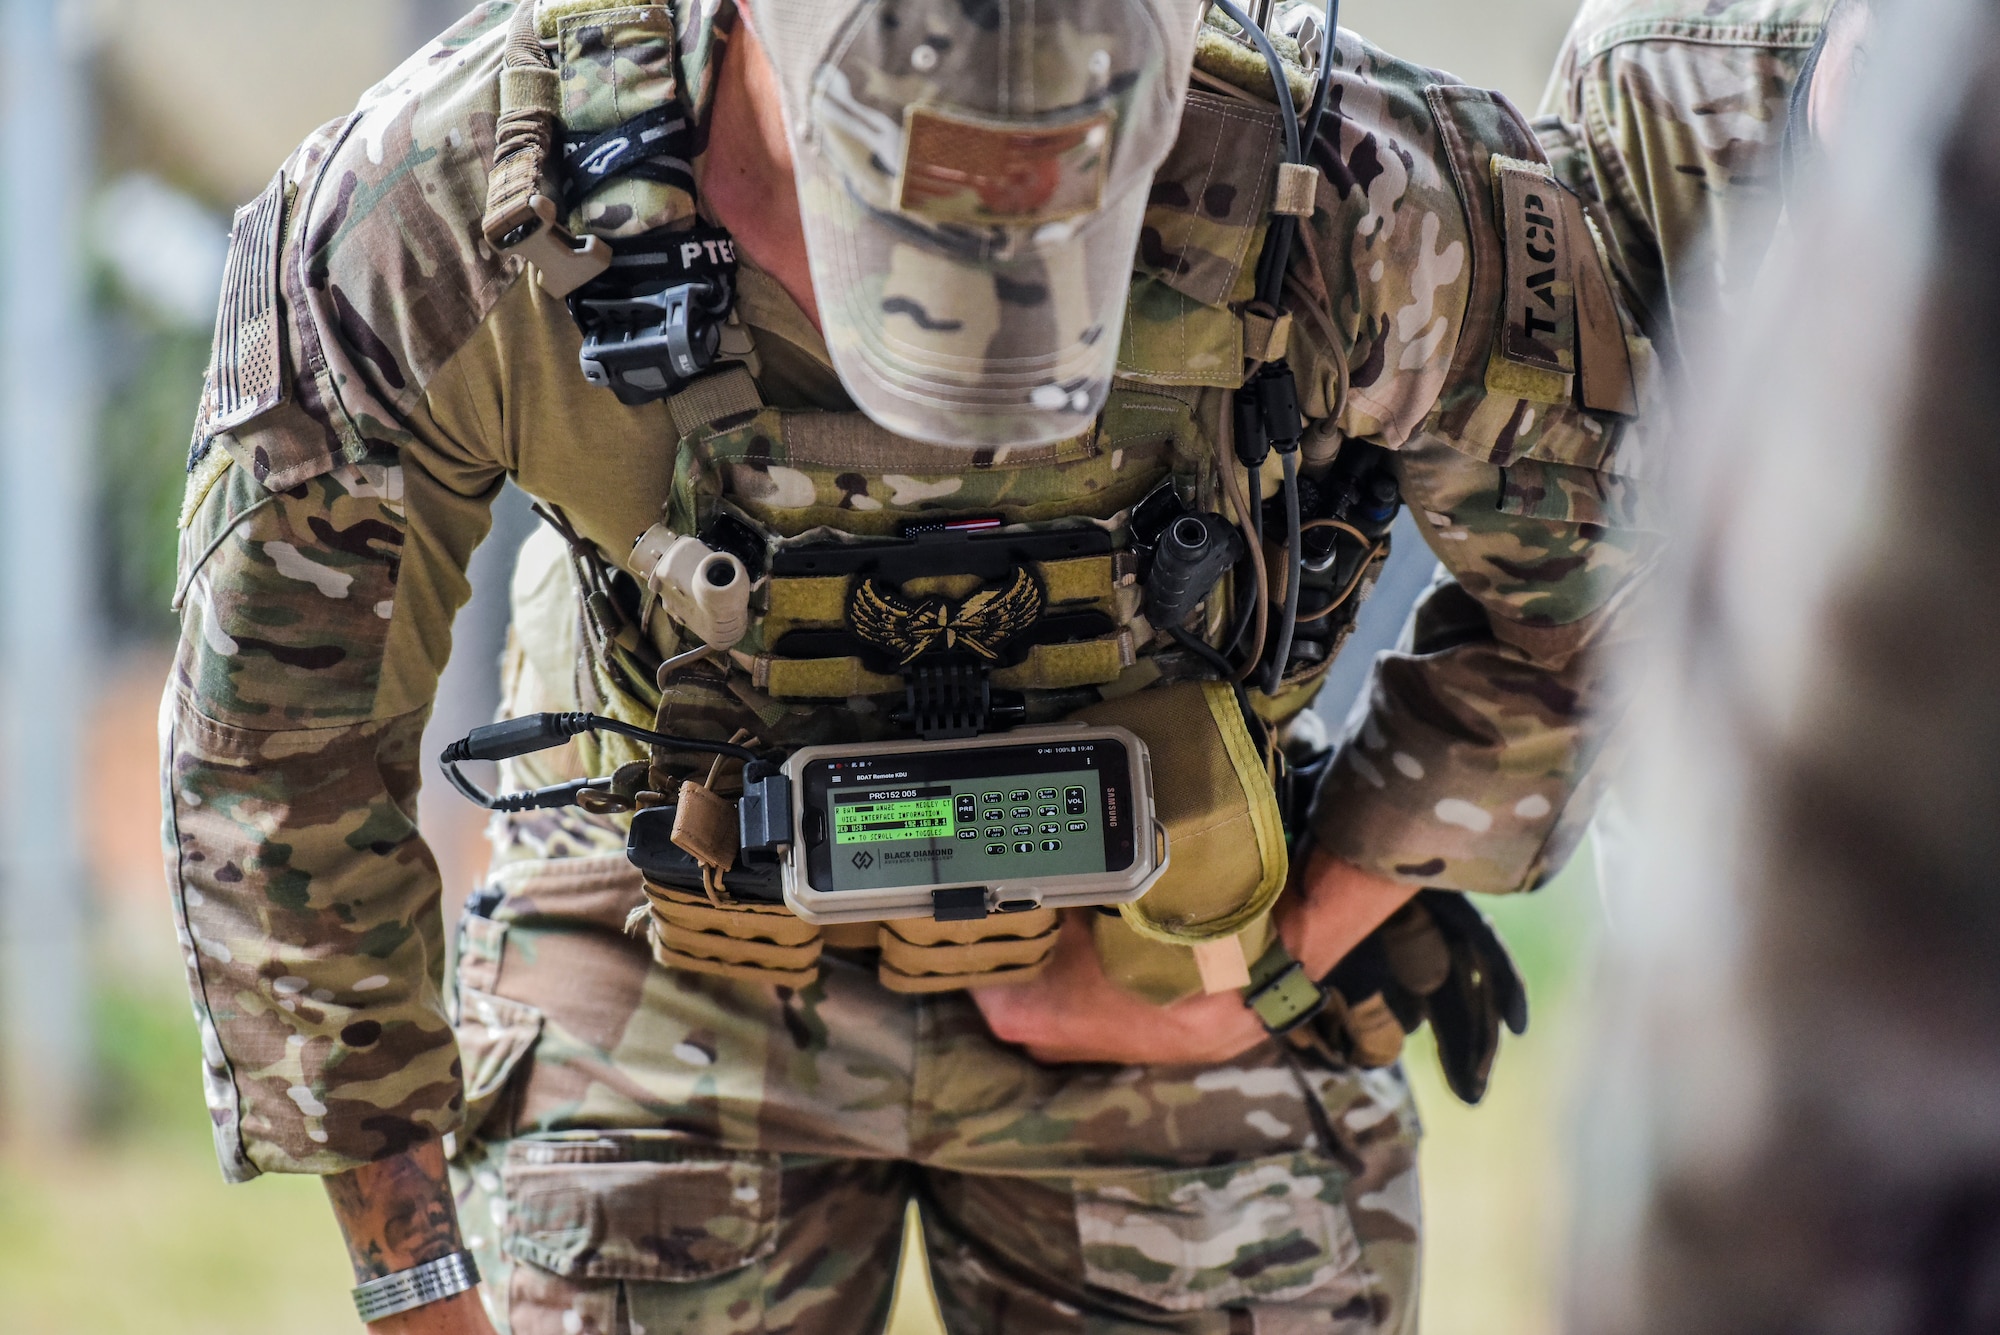 Tech. Sgt Joshua McKeever, 25th Air Support Operations Squadron tactical air control party Airman, demonstrates how the EvolutionONE, a GPS and communication system, is designed to attach to body armor at Wheeler Army Airfield, Hawaii, August 4, 2020. The lesson helped Airmen understand the communications network they will deal with in a deployed location. (U.S. Air Force photo by Tech. Sgt. Anthony Nelson Jr.)